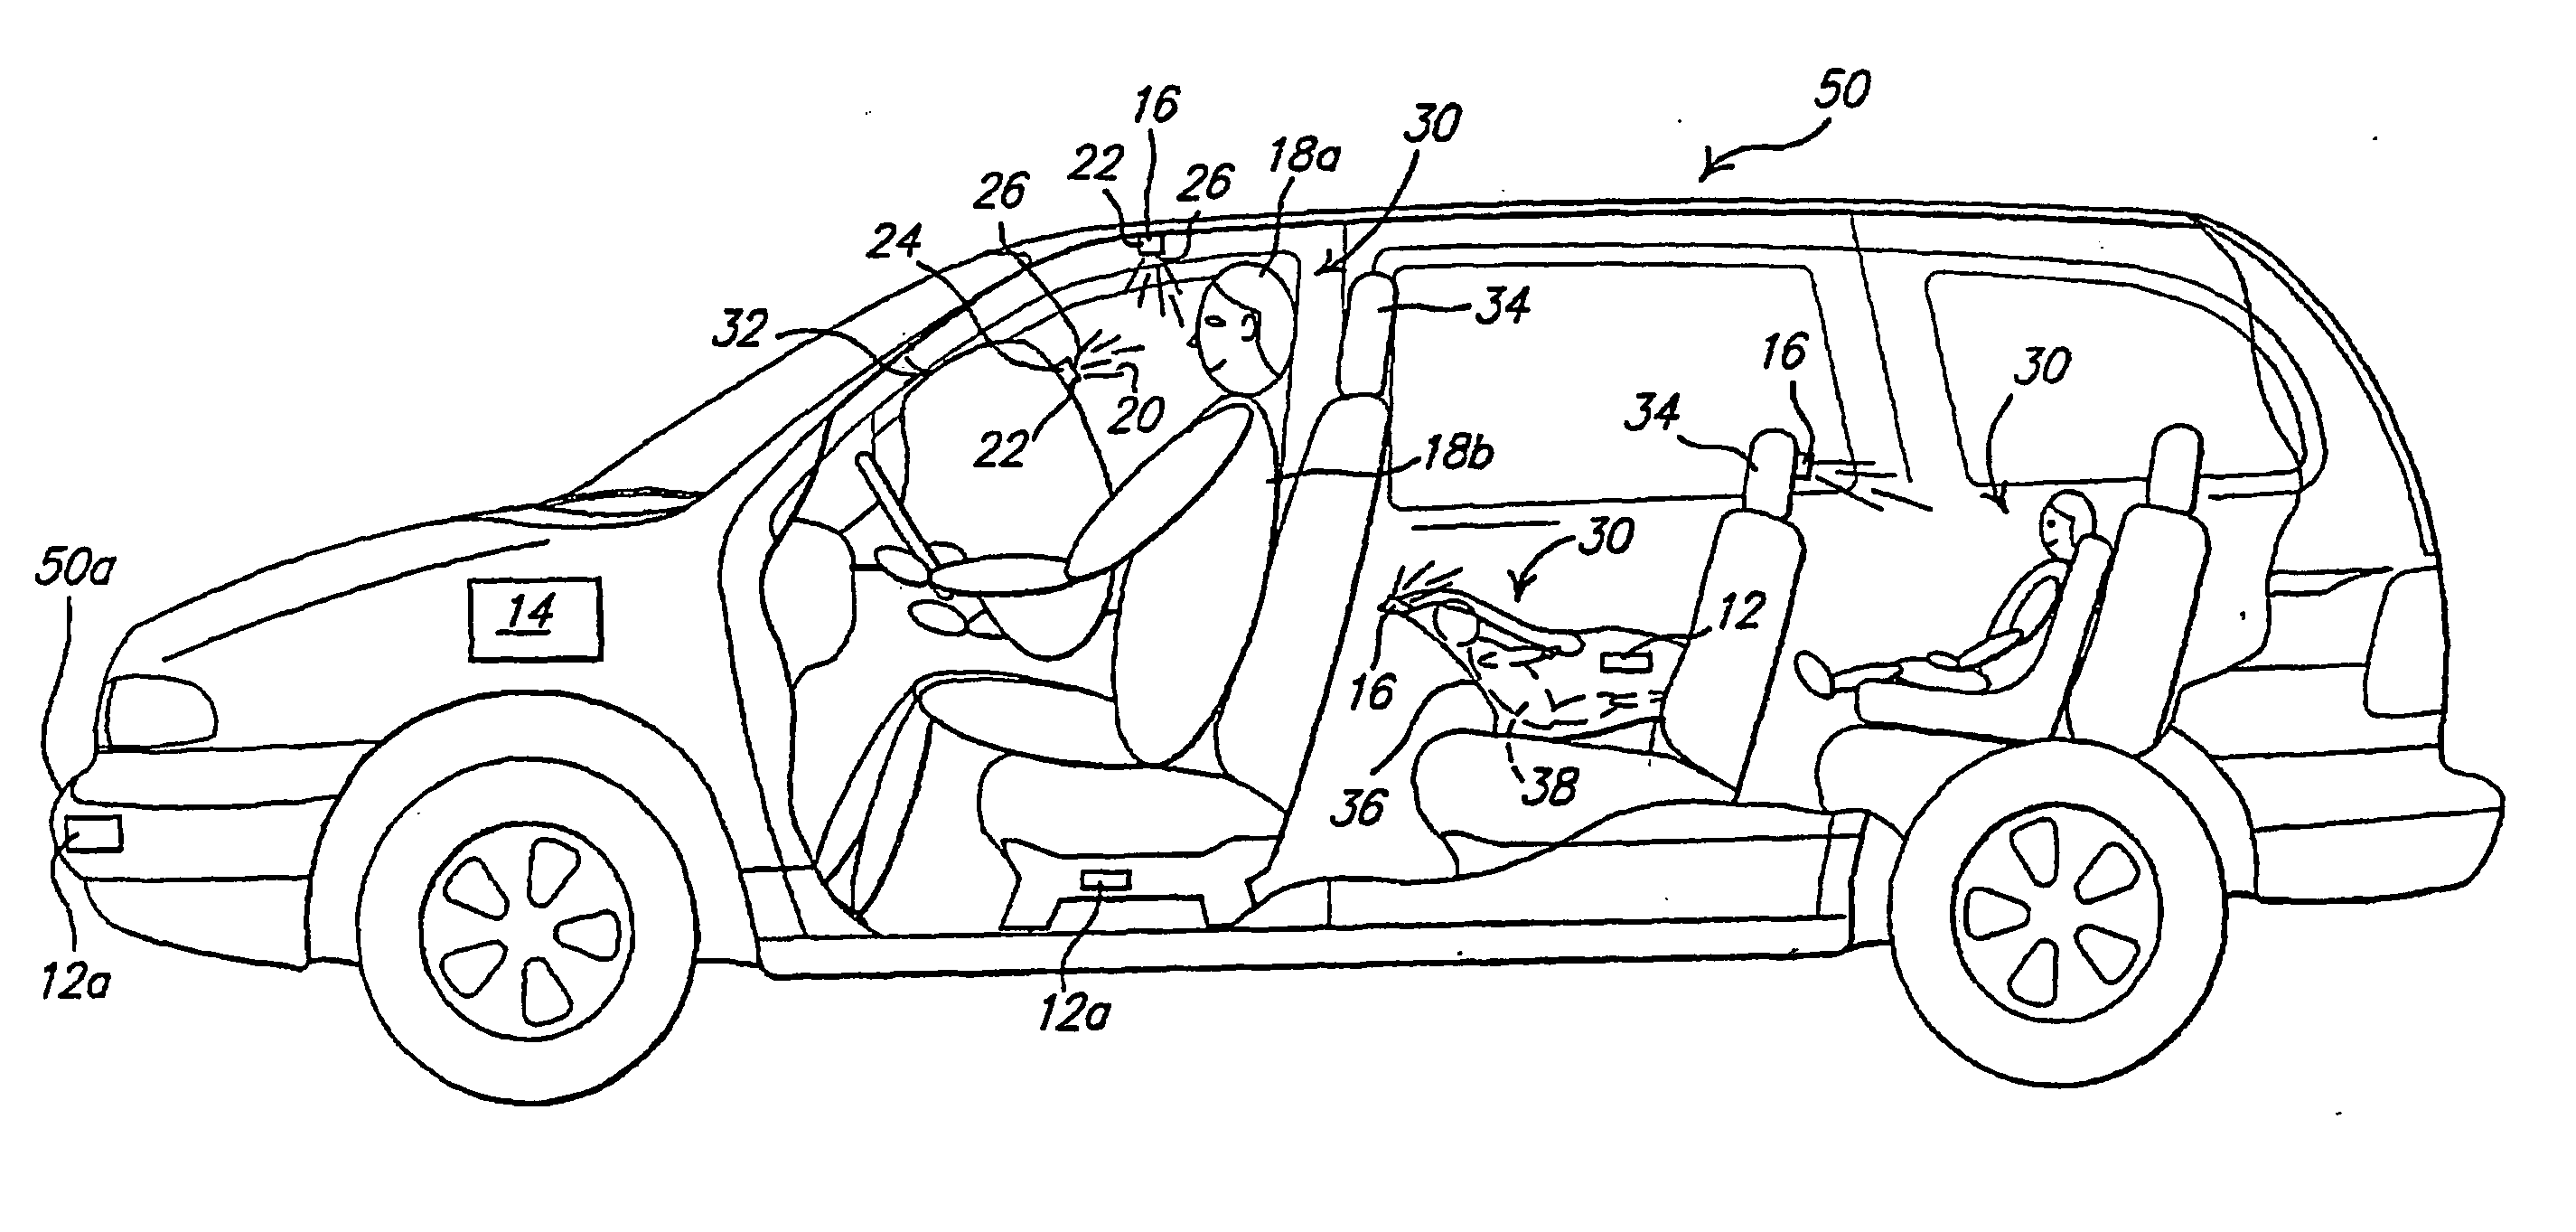 System and method of active neuro-protection for detecting and arresting traumatic brain injury and spinal cord injury